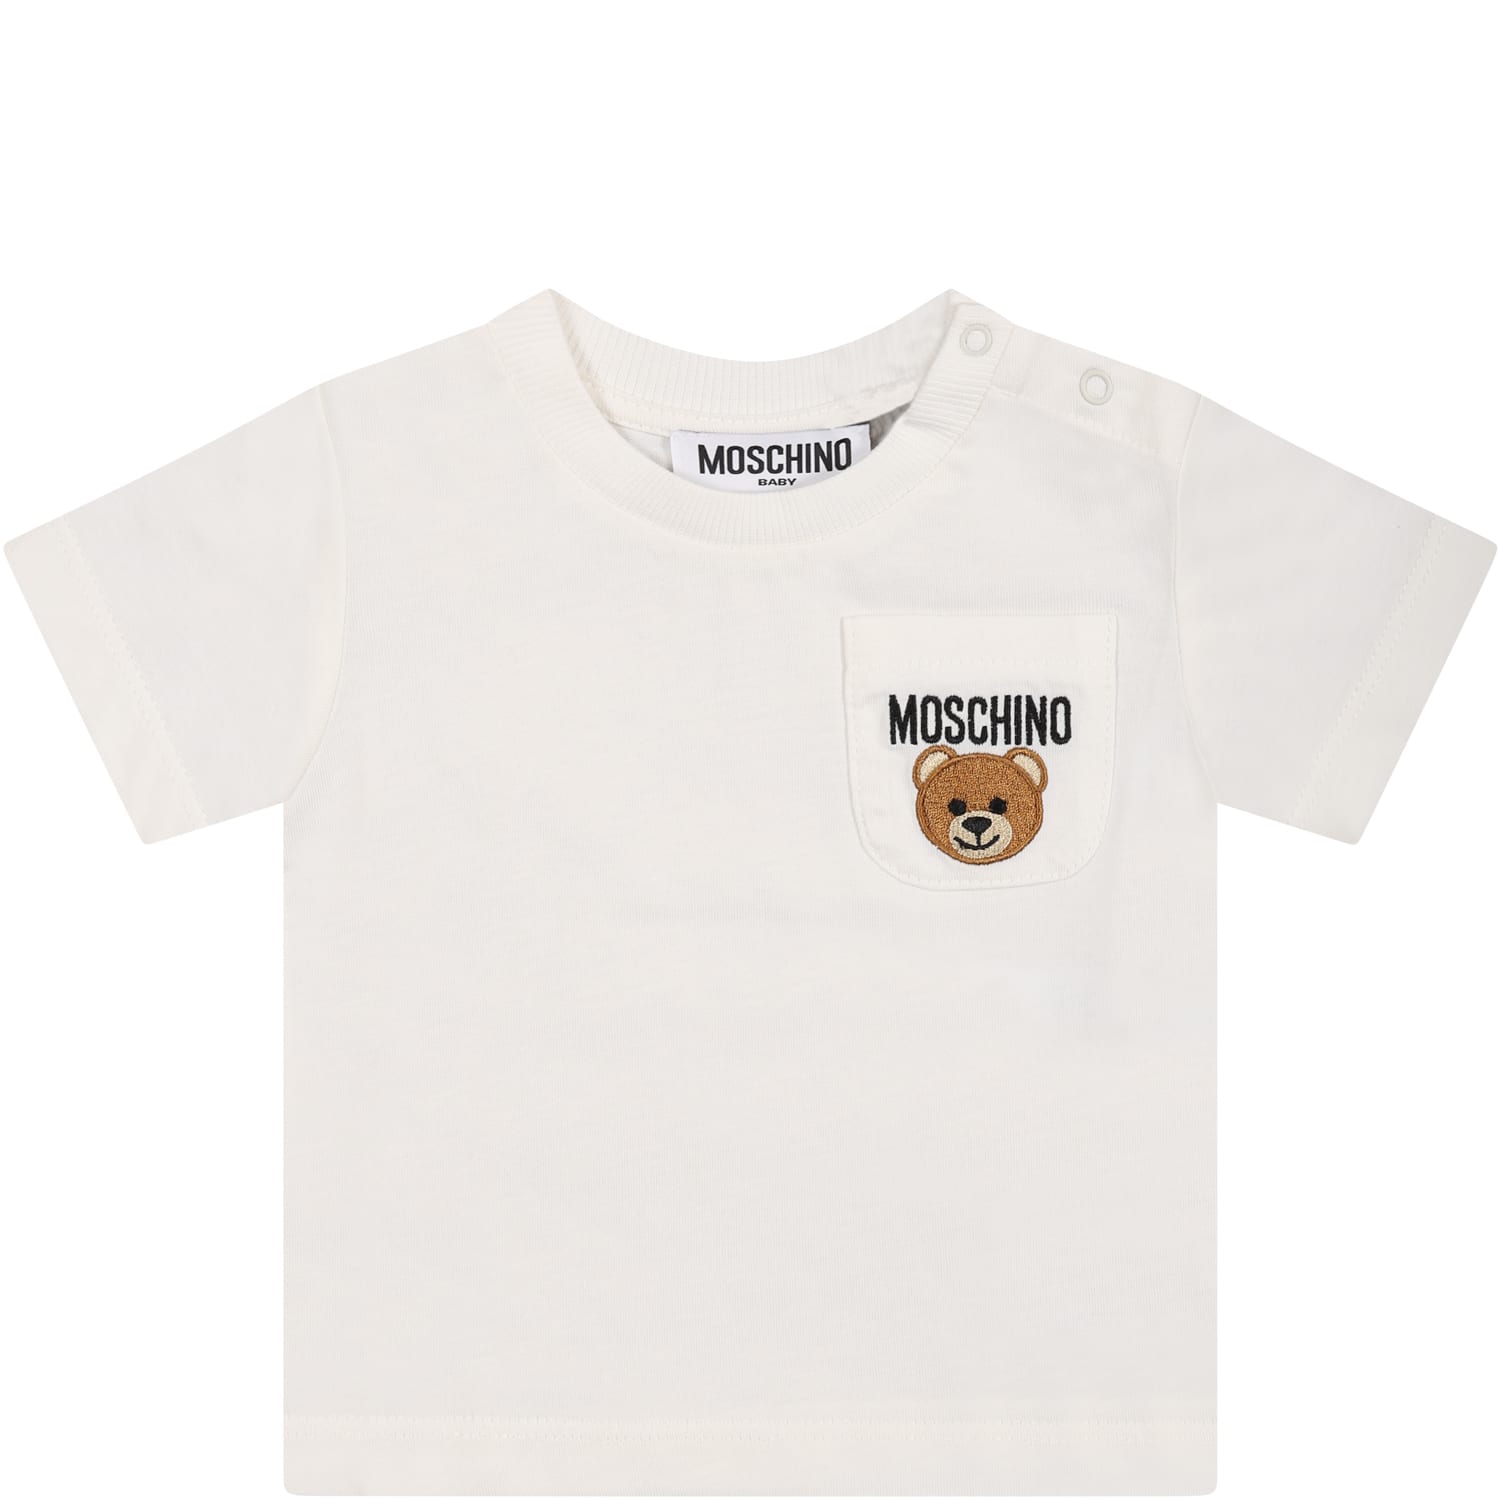 Moschino Kids' White T-shirt For Babies With Teddy Bear